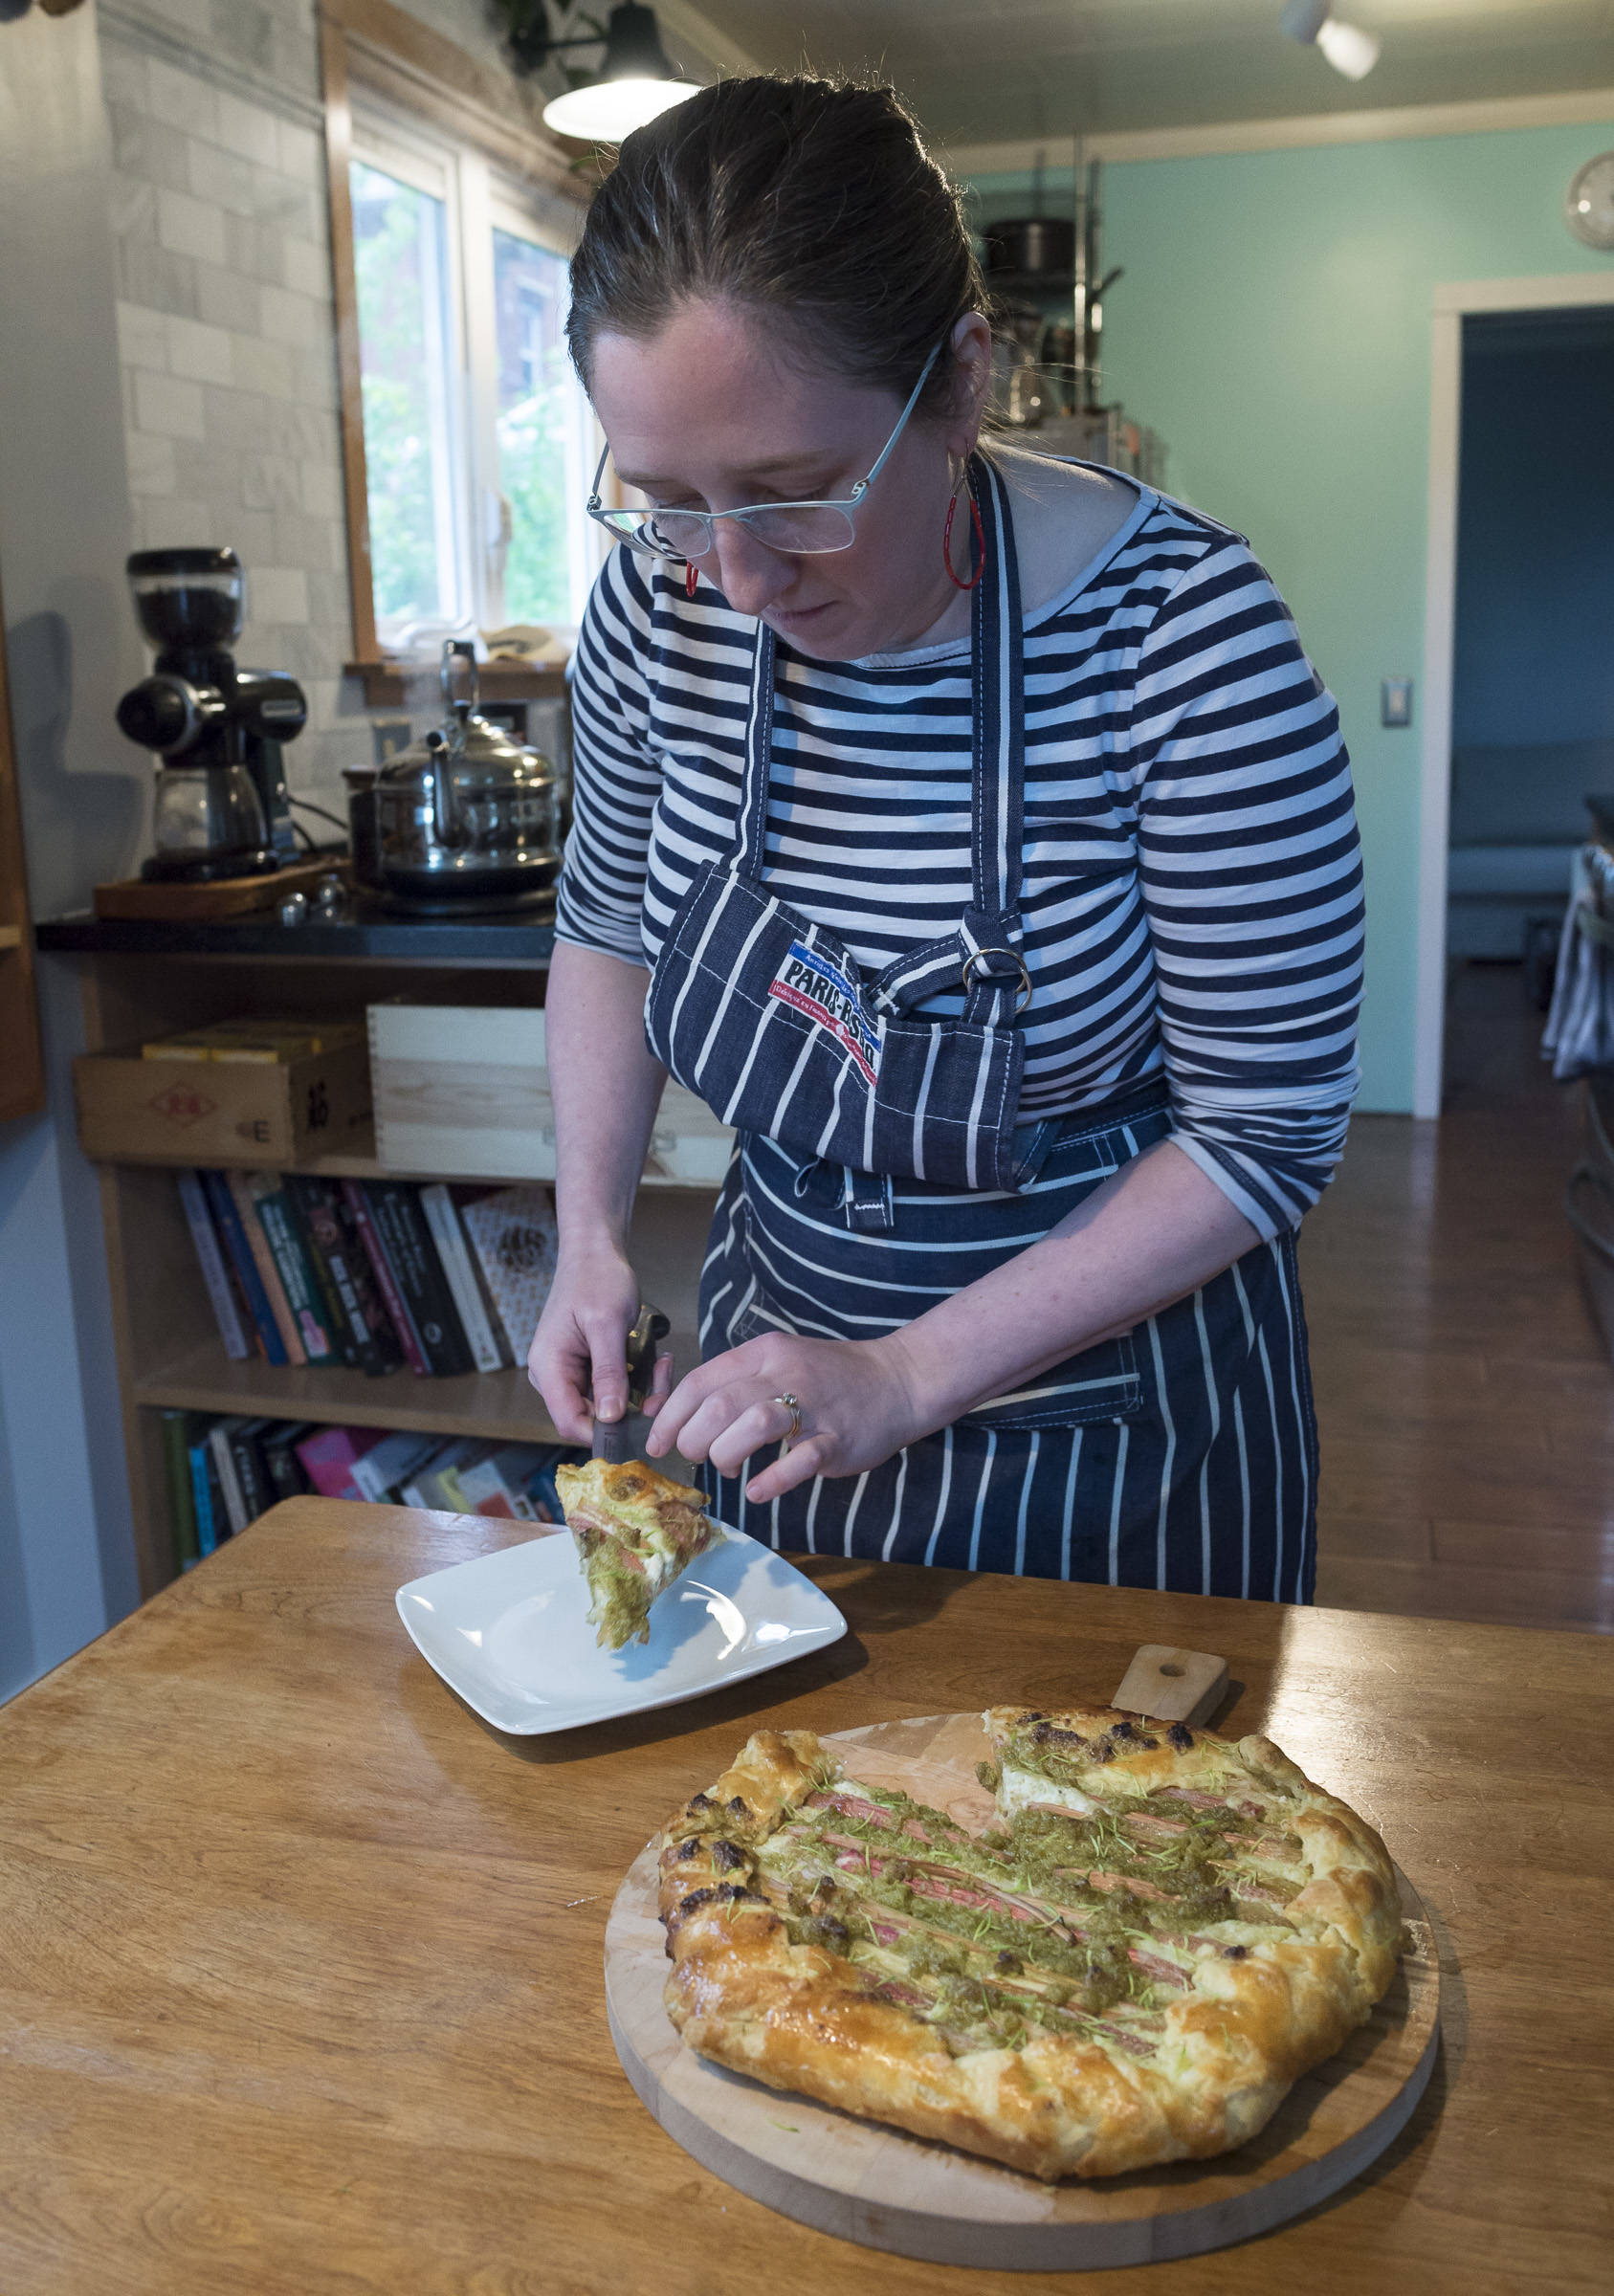 Erin Anais Heist, author of a new cooking column called “Eating Wild” for the Juneau Empire, dishes a slice of her galette made with with rhubarb, spruce tip and ricotta cheese in her home kitchen on Monday, May 21, 2018. (Michael Penn | Juneau Empire)